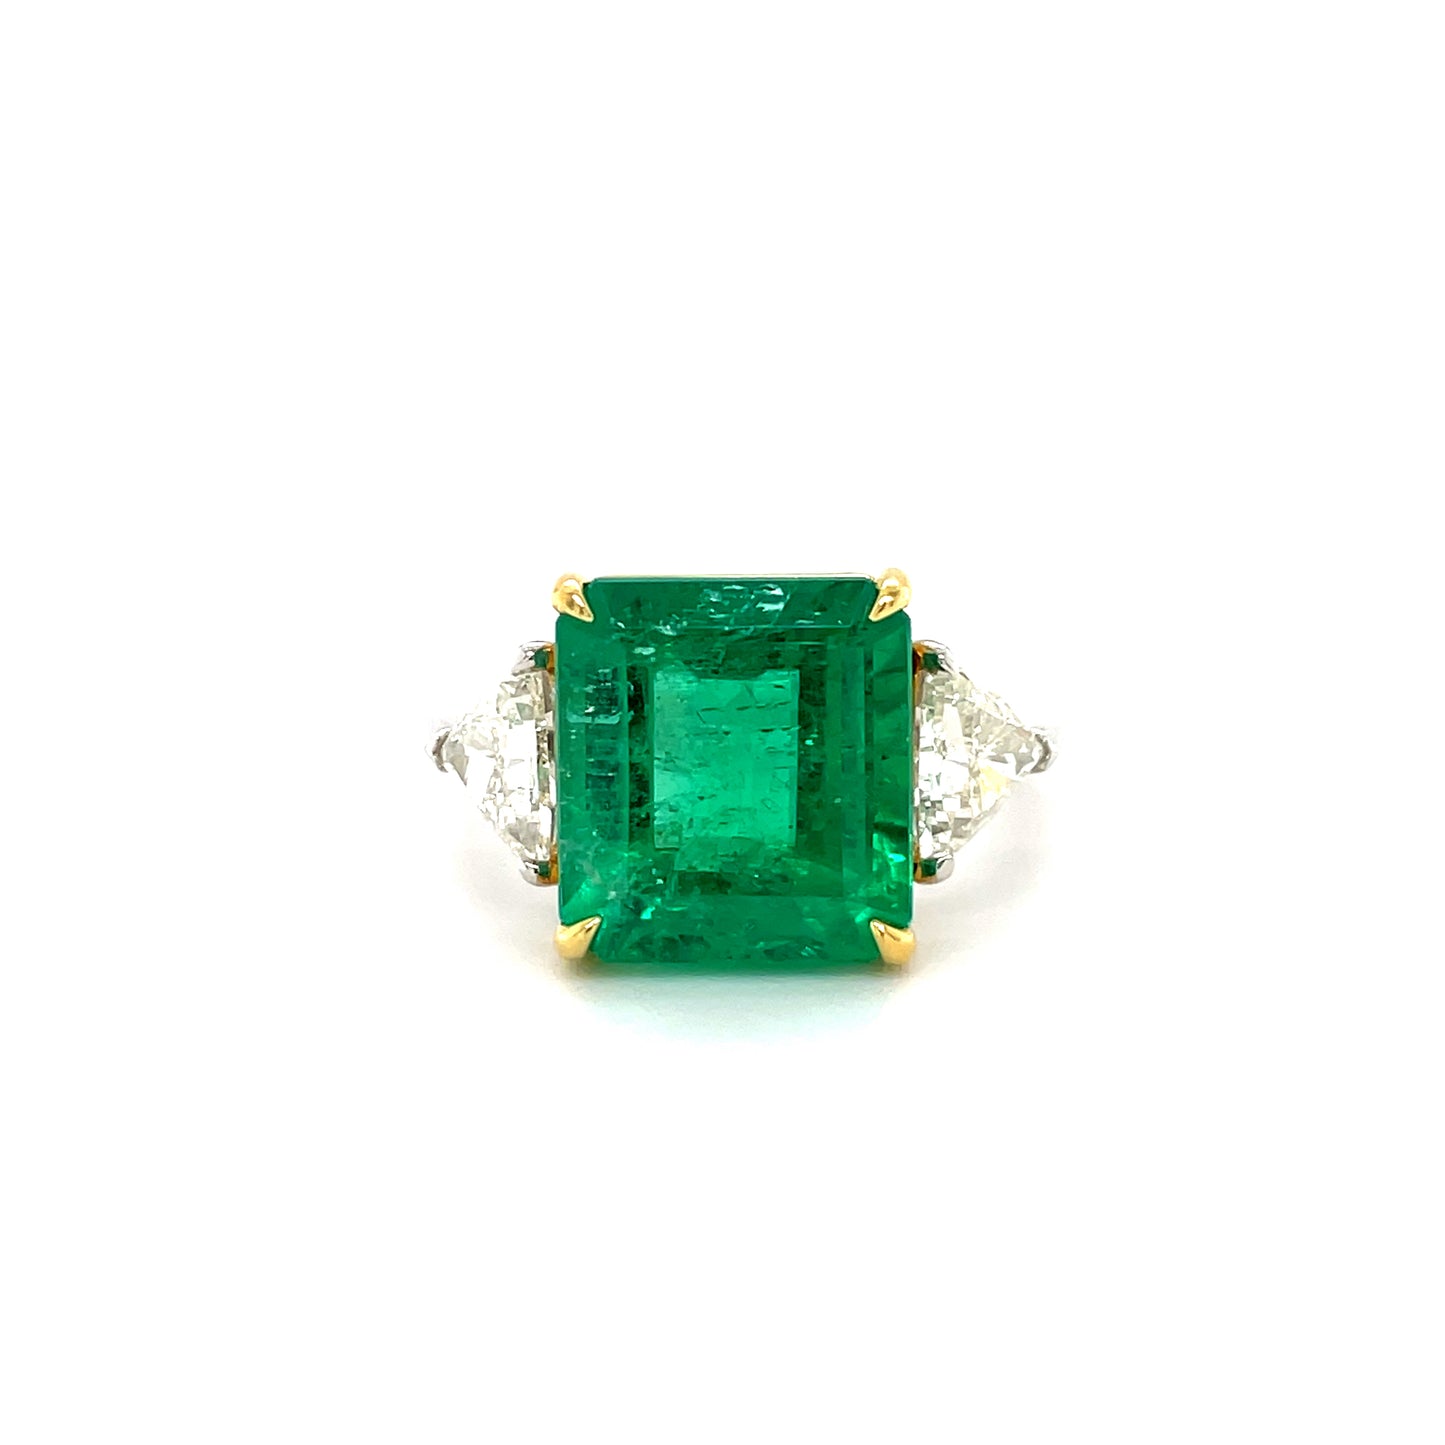 5.08 Carat Colombian Emerald and Diamonds Ring